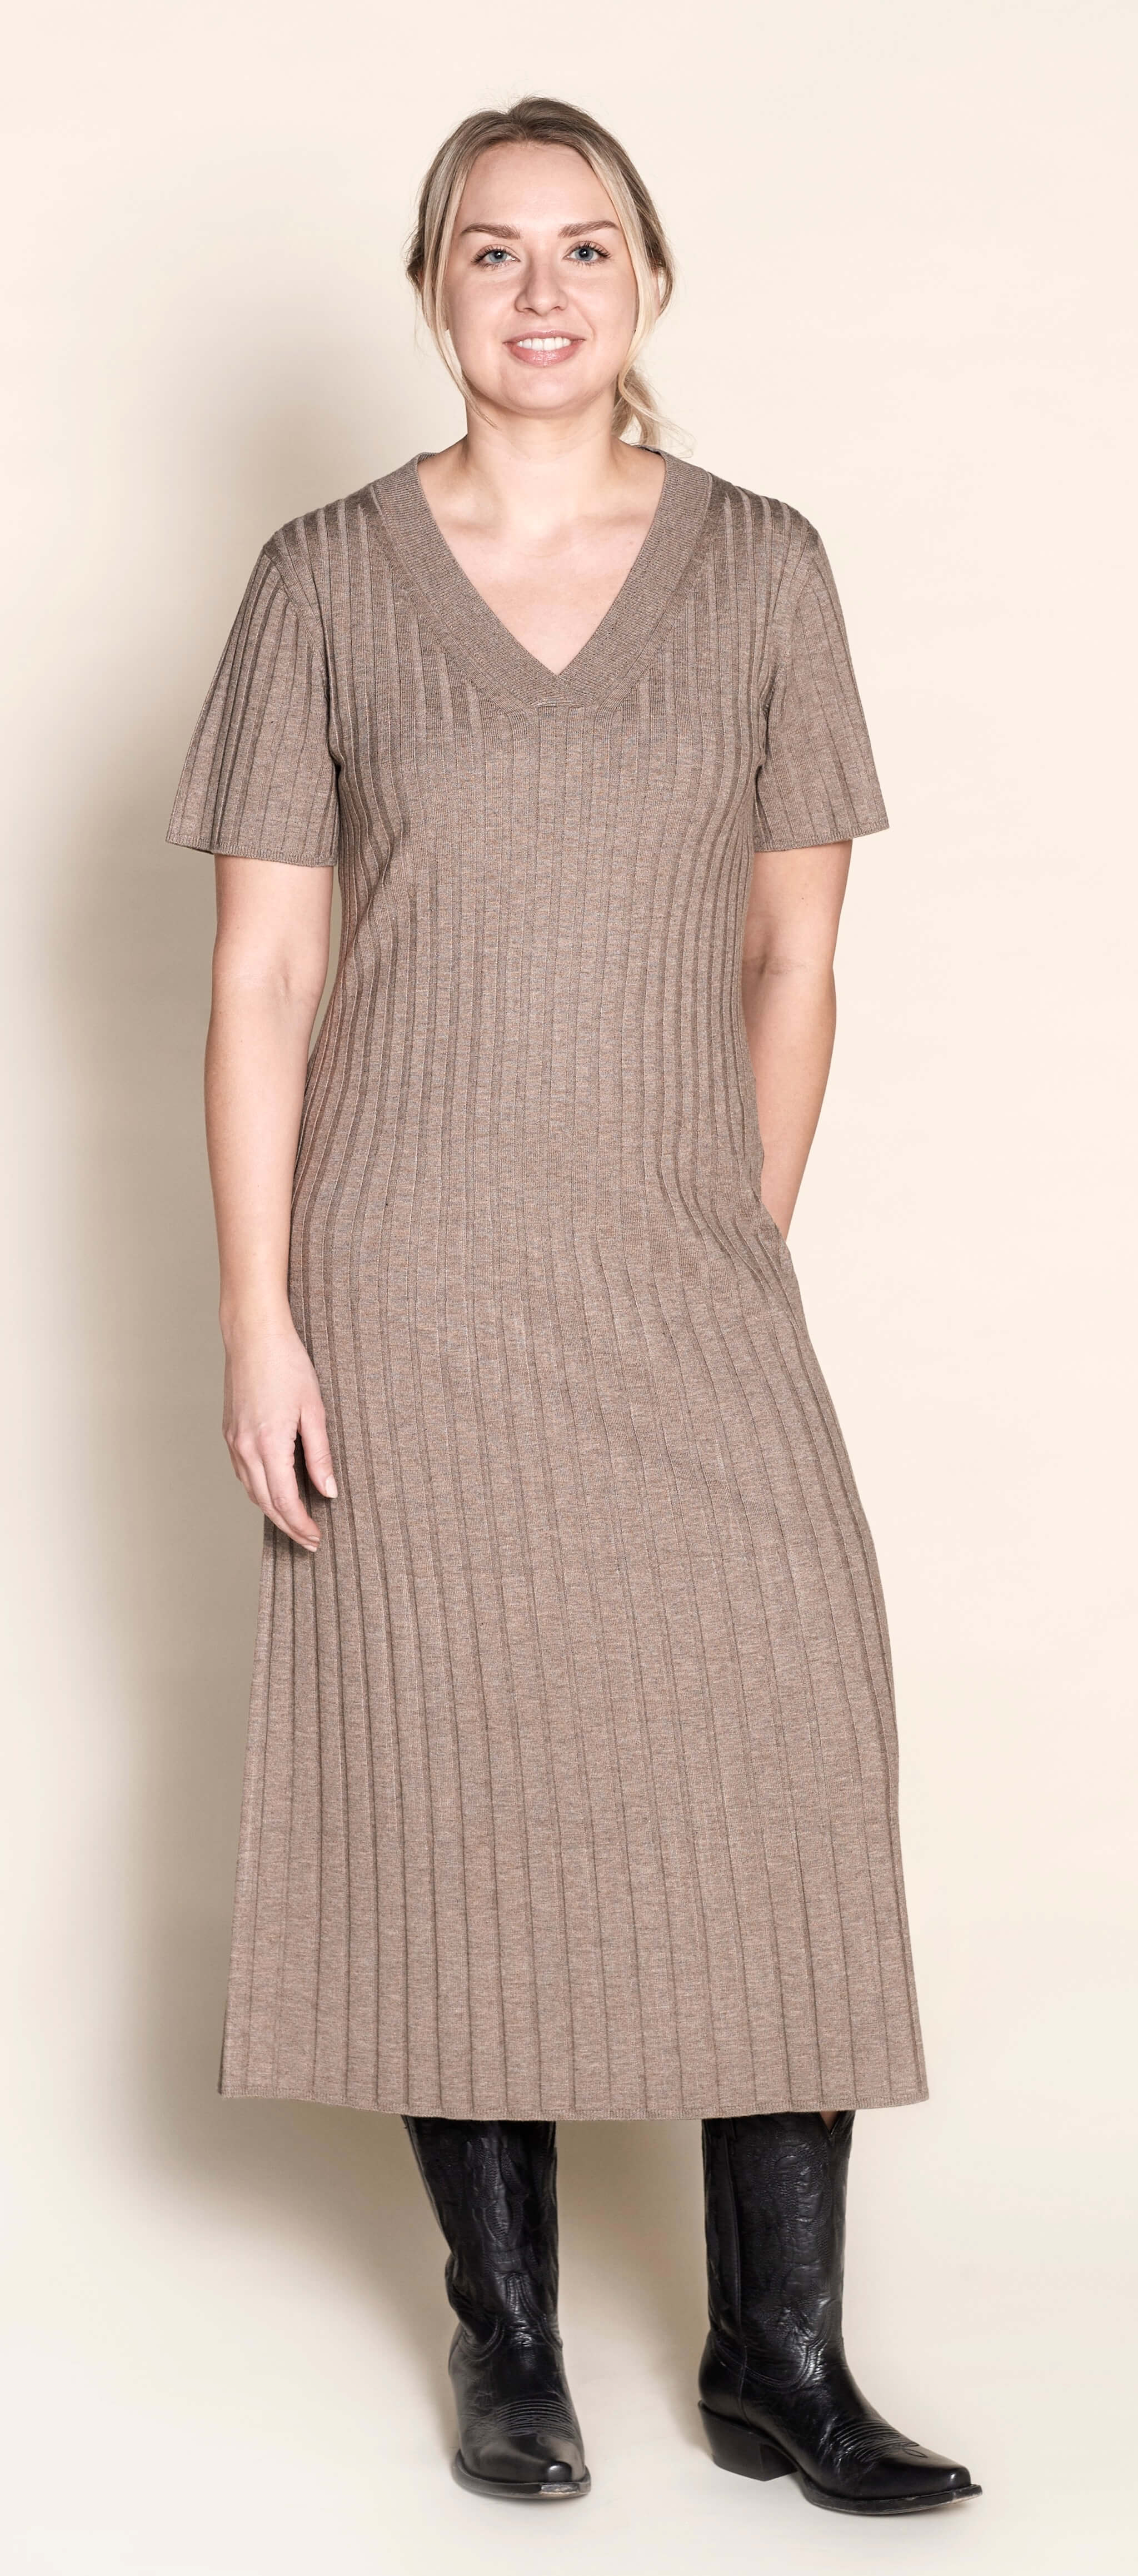 Smiling model presents a sophisticated V-neck knit dress by Cyme Copenhagen, crafted with natural materials, encapsulating the essence of sustainable, timeless Scandinavian fashion.